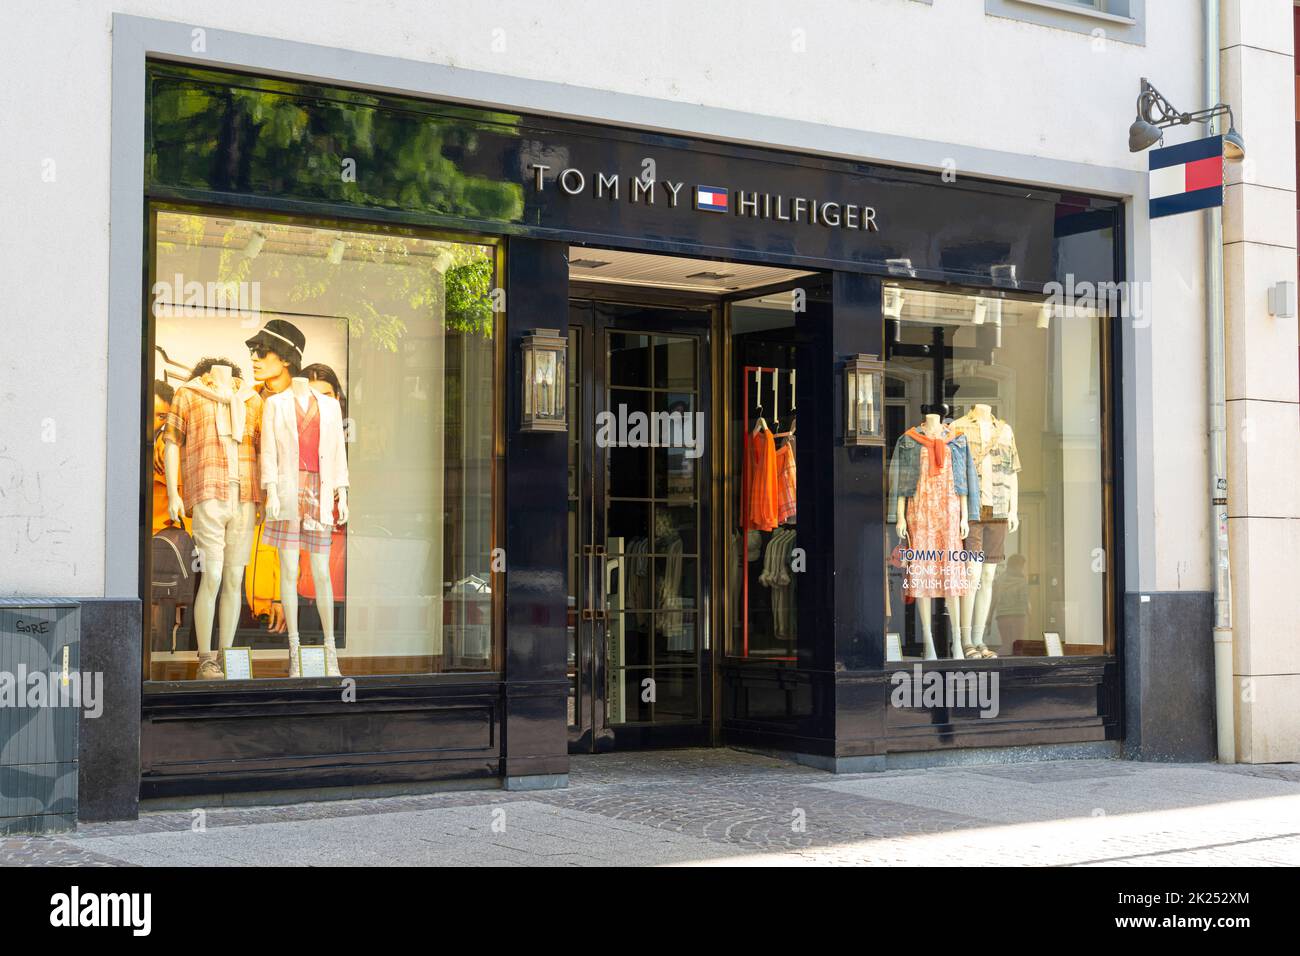 Tommy hilfiger outlet store in usa 